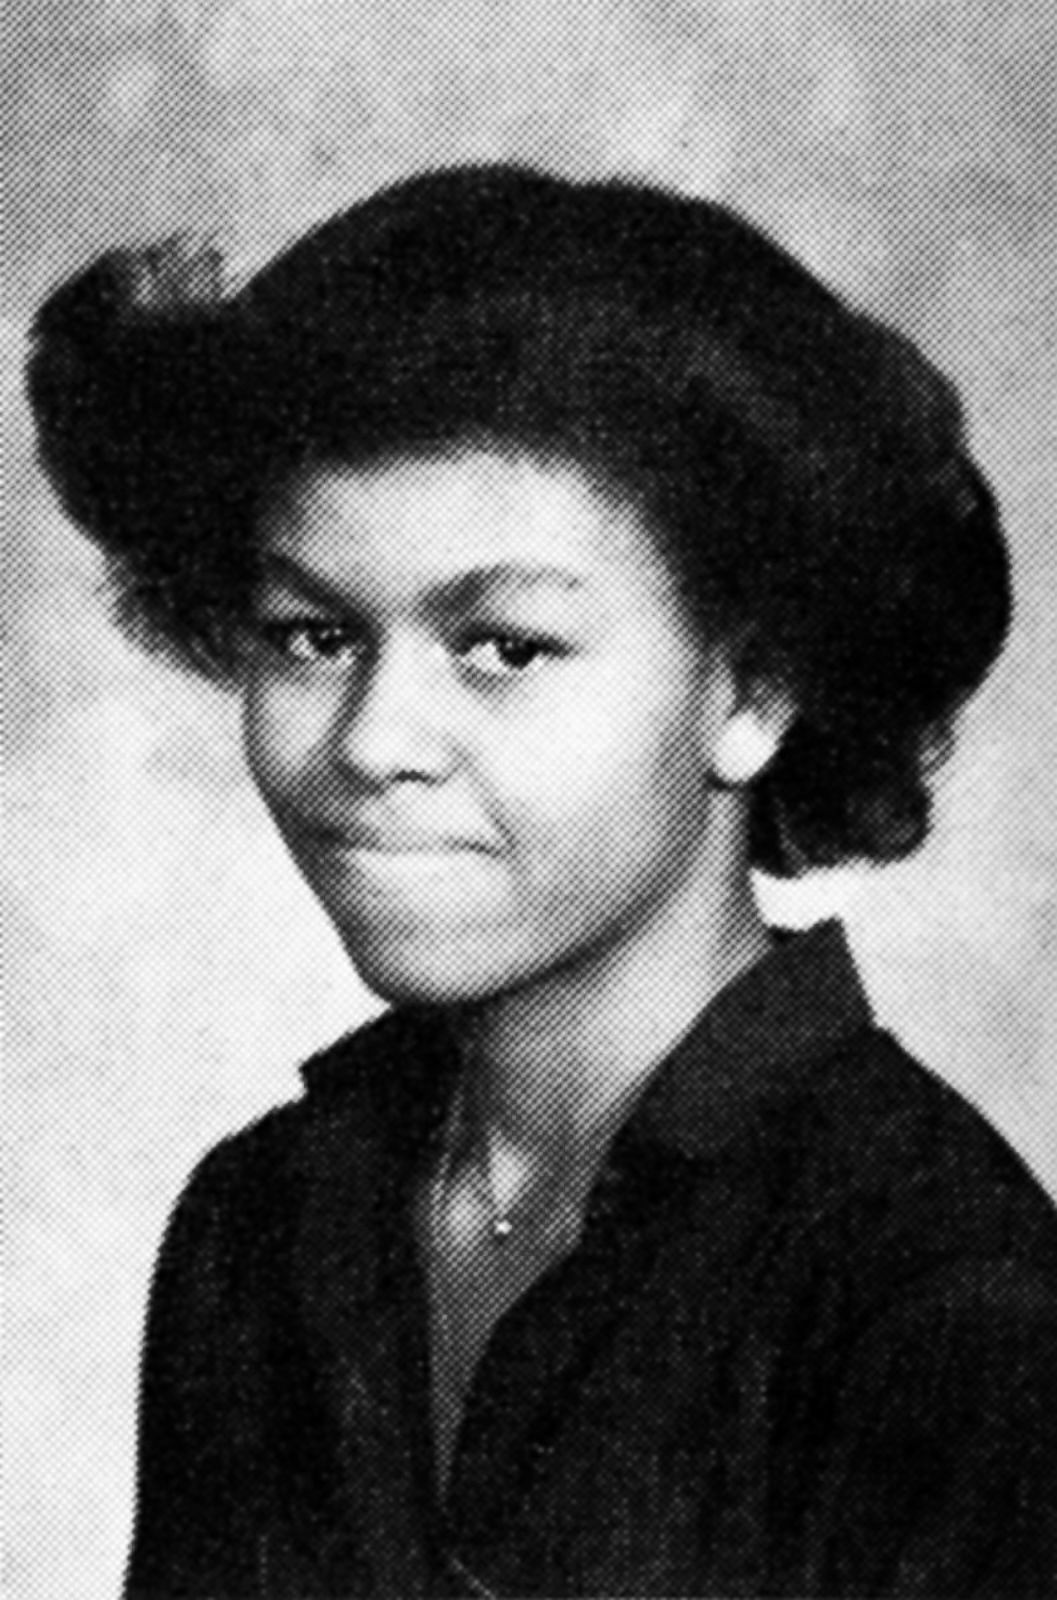 Picture | Michelle Obama Through the Years - ABC News